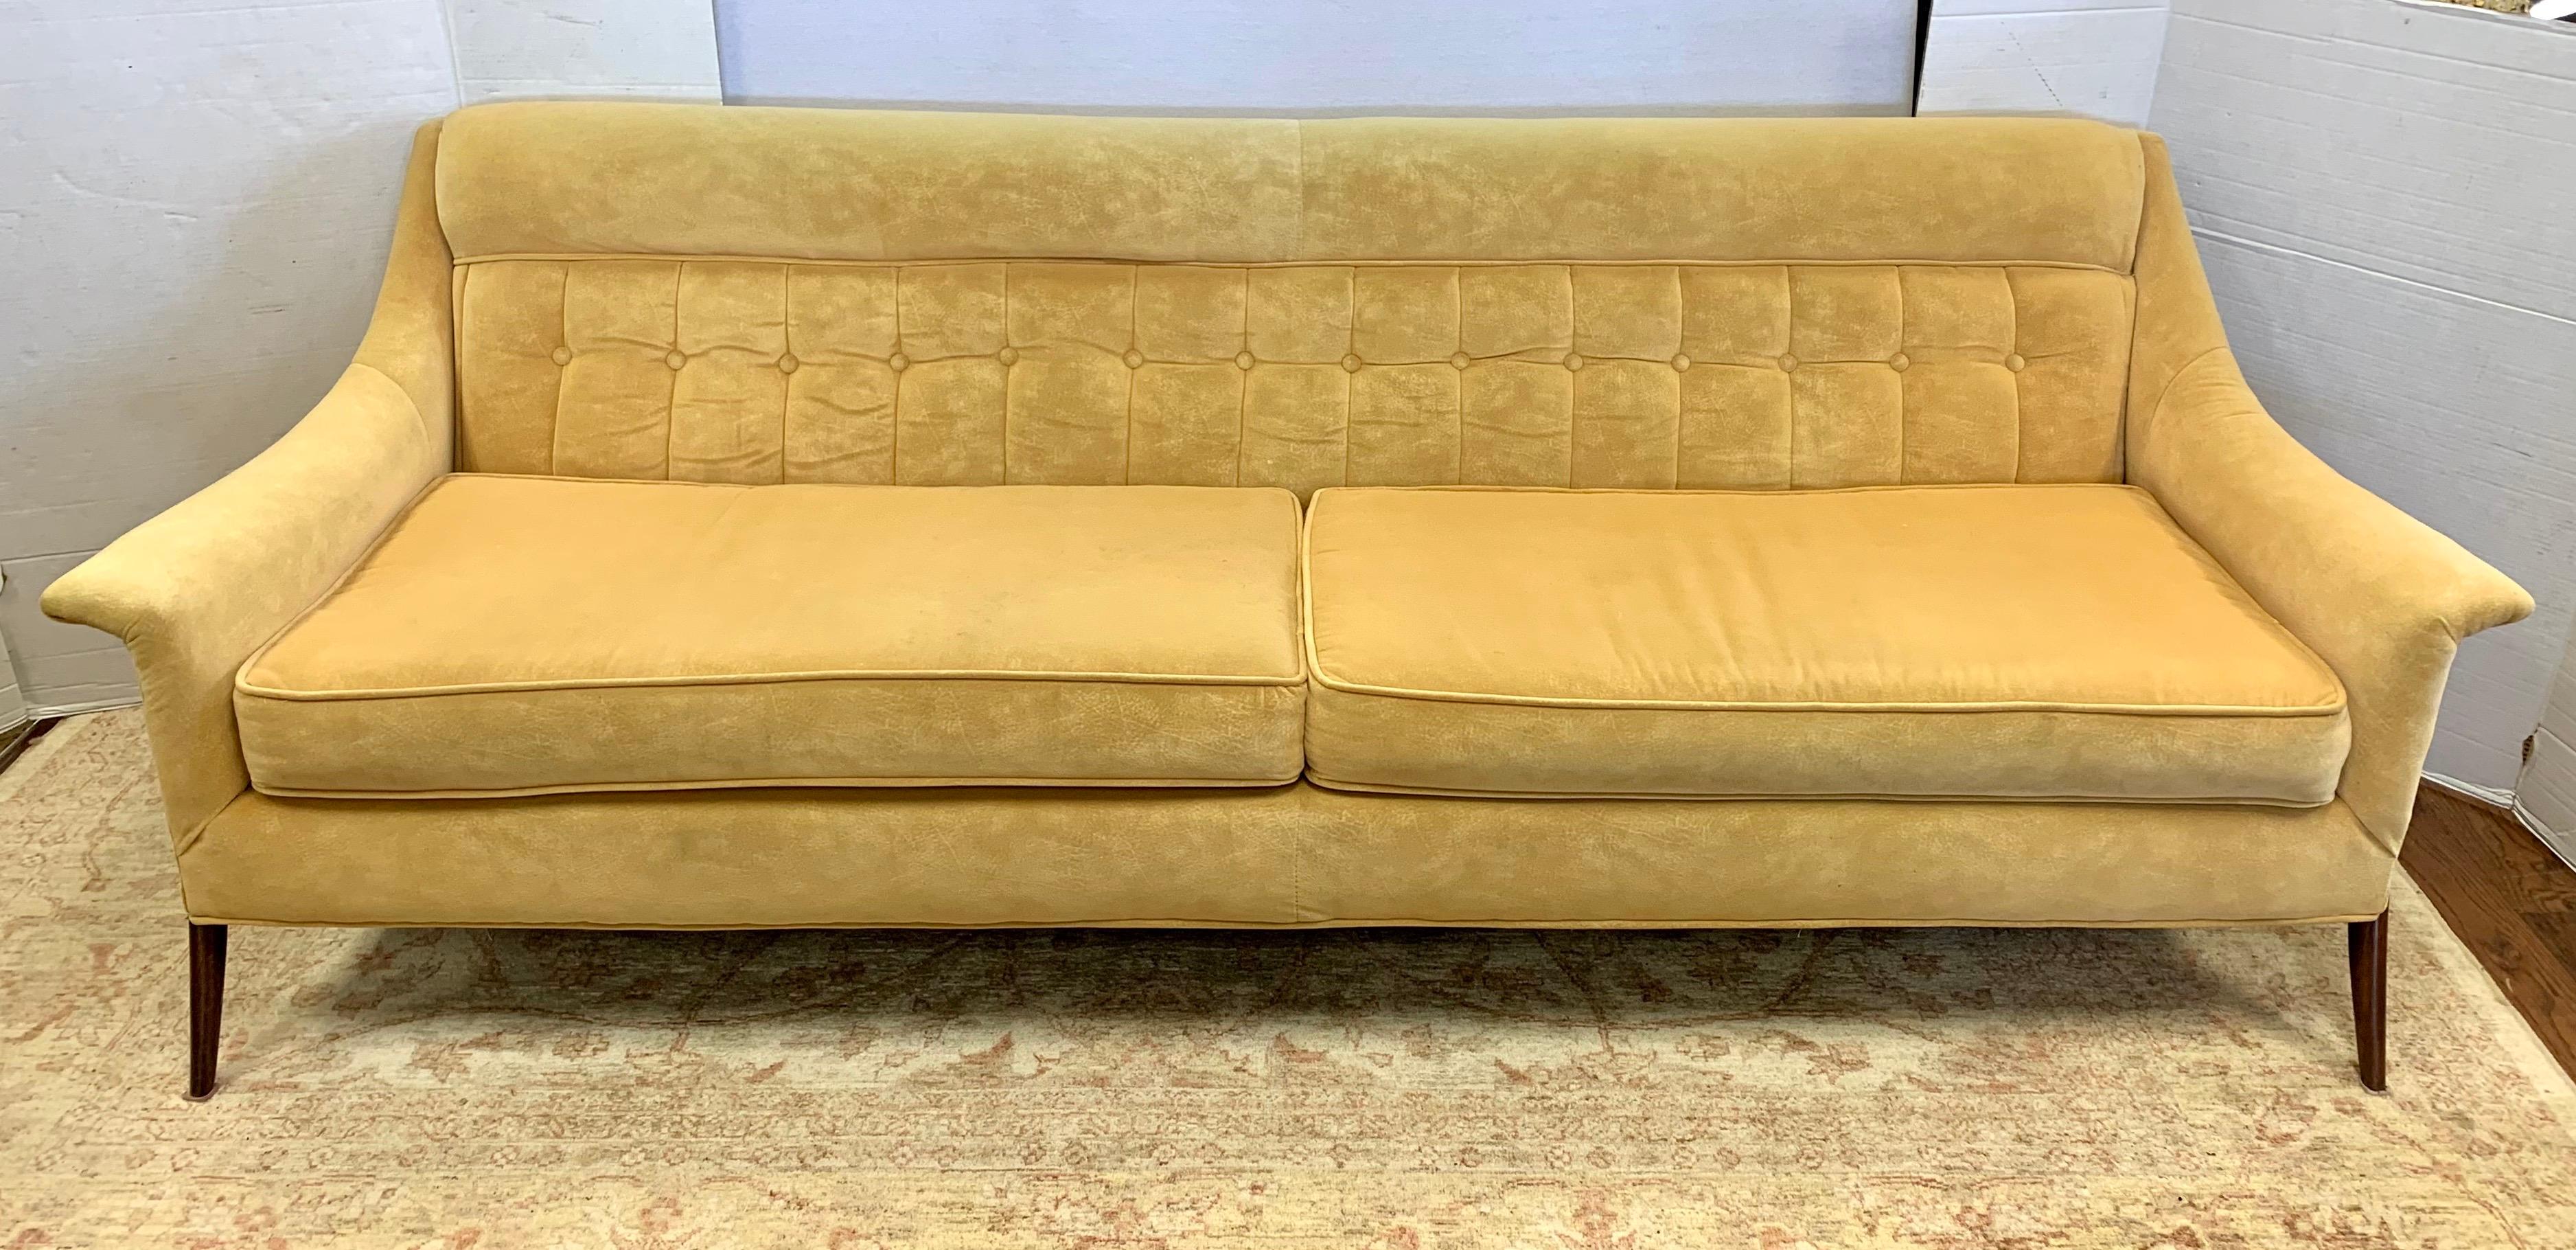 Midcentury Danish Modern Tufted Sculptural Sofa with Ultra Suede Fabric 2